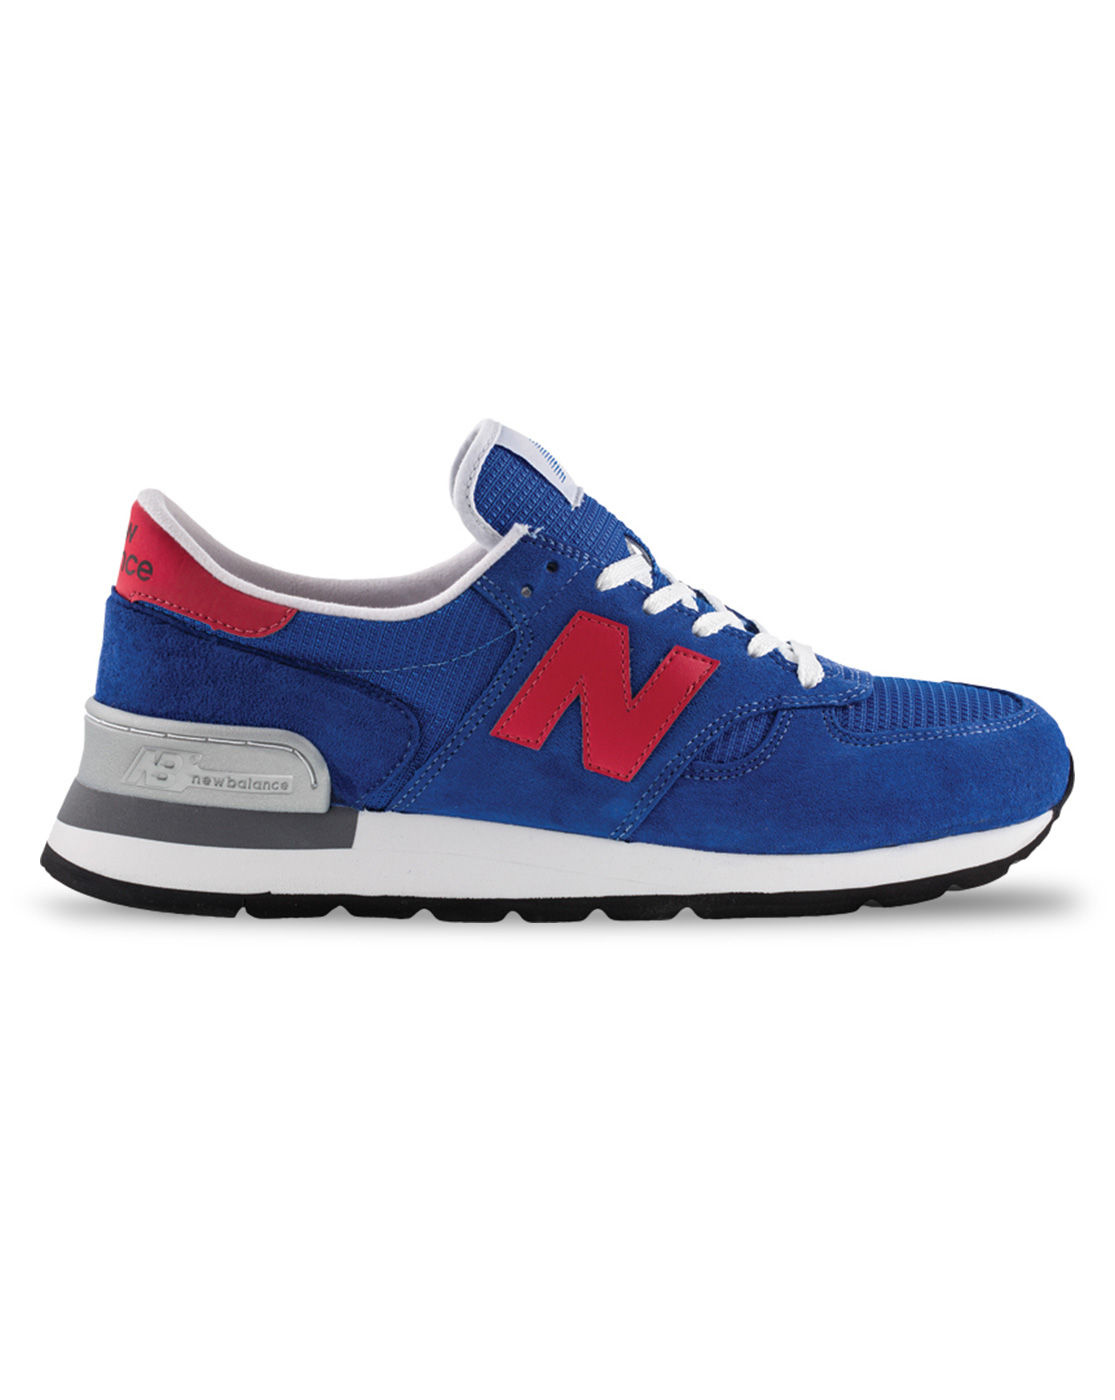 New Balance Royal Blue Suede 990 Sneakers Made in Usa in Blue for Men ...